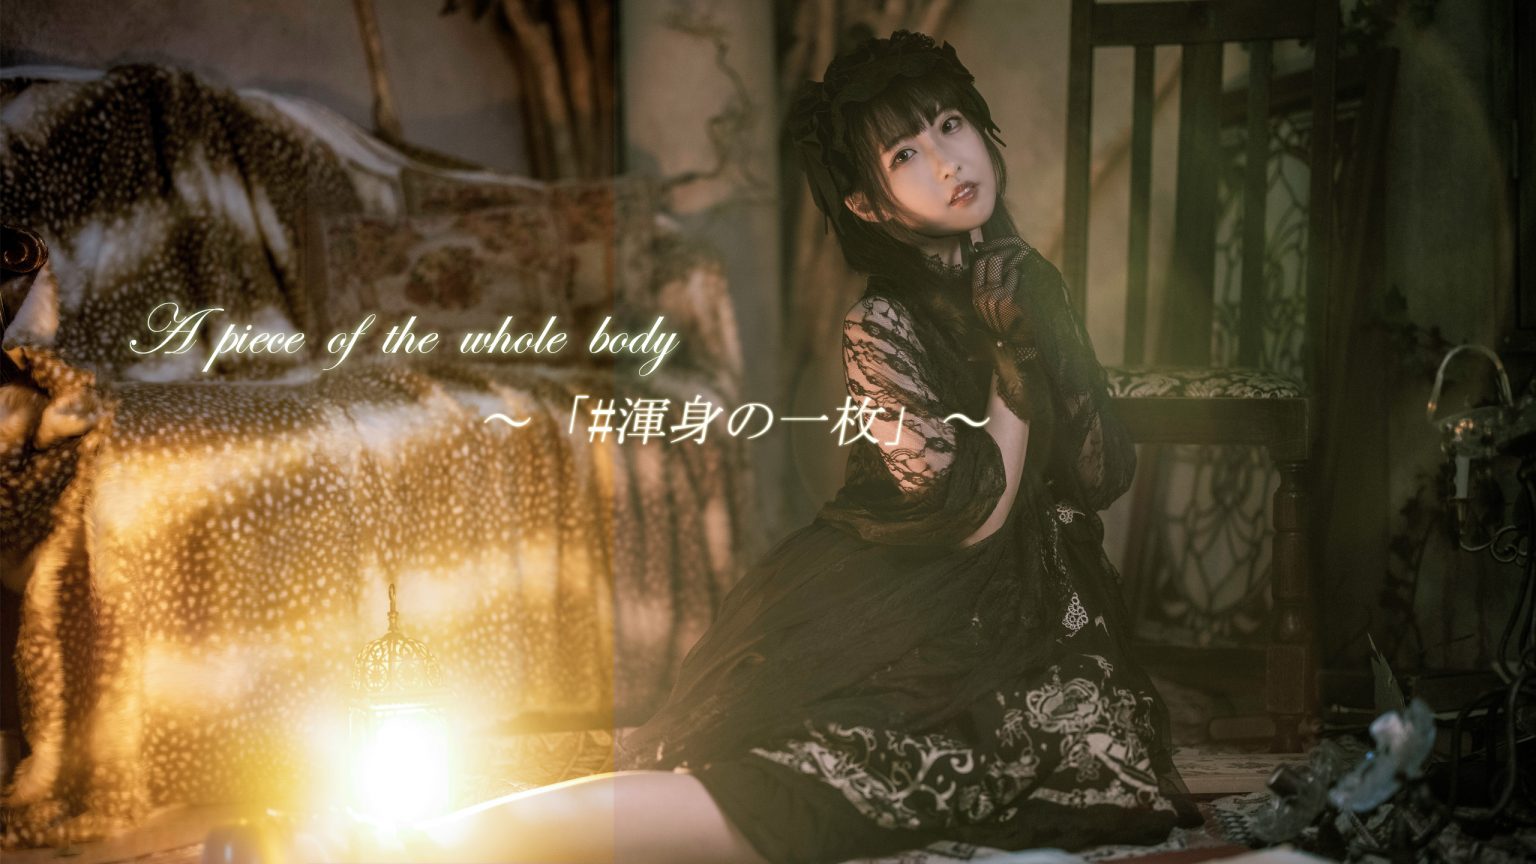 【Adobe】A piece of the whole body「#渾身の一枚」